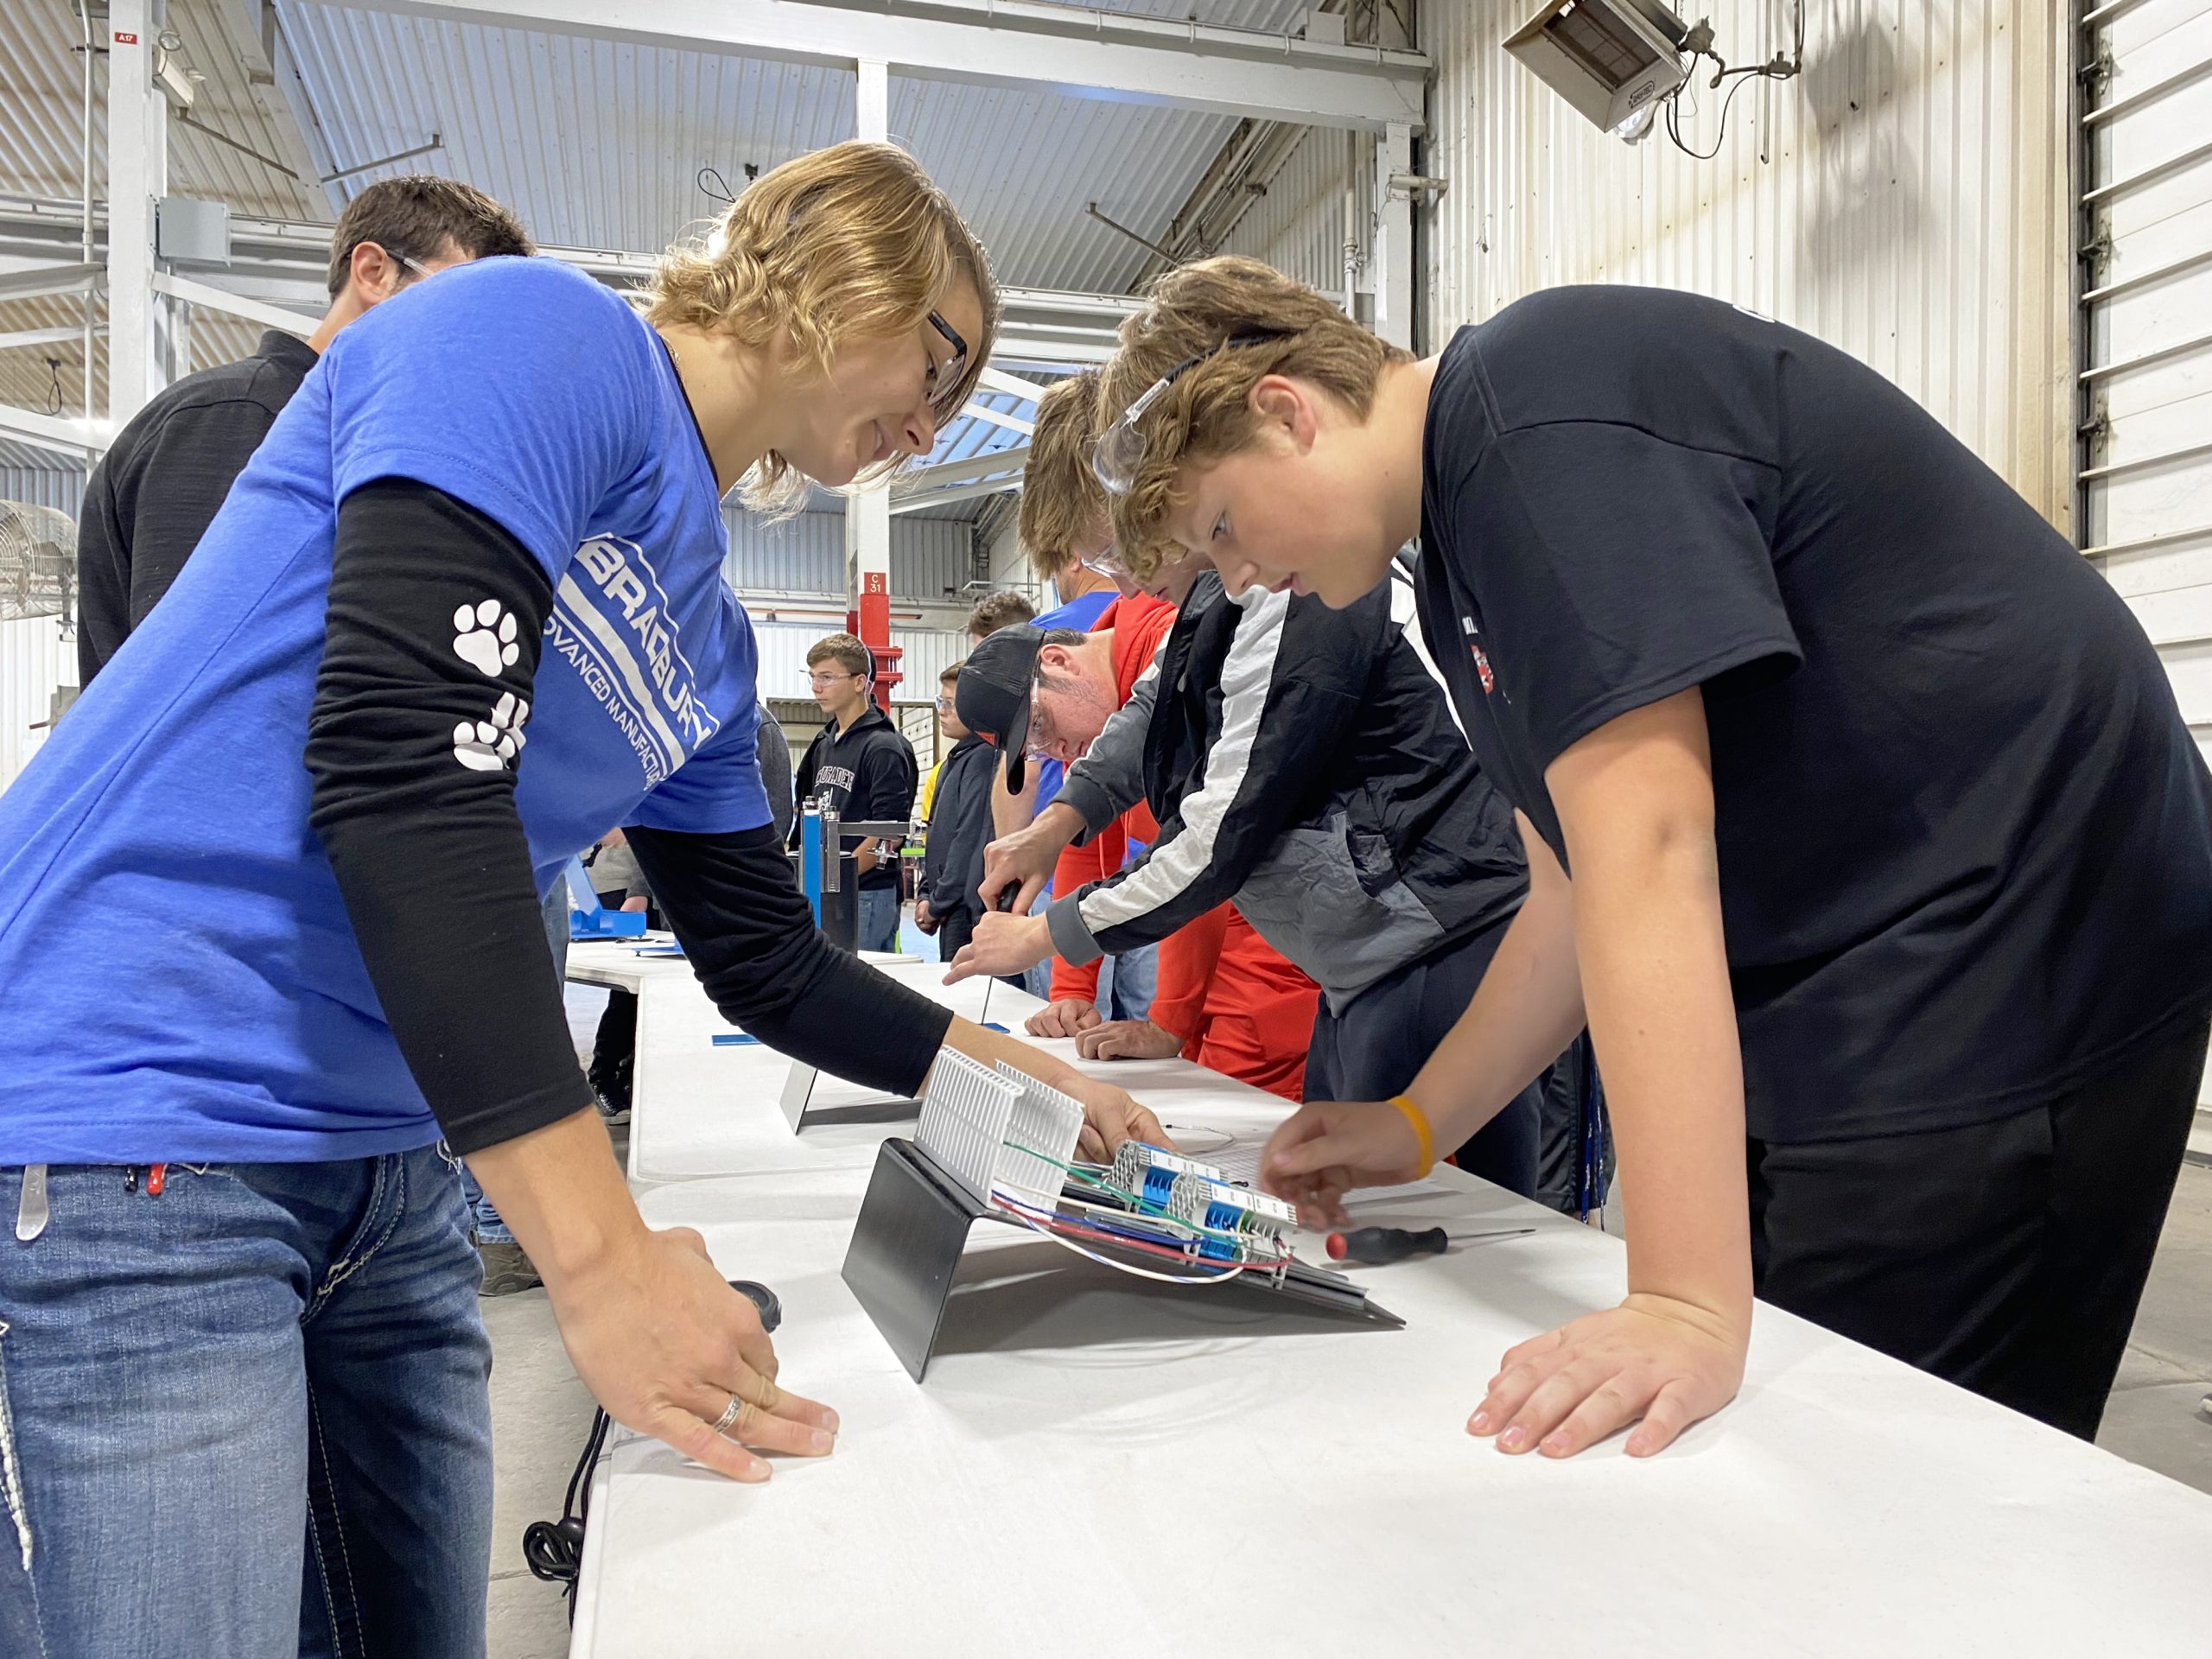 Bradbury Co. Hosts Over 300 Students for Annual Manufacturing Day